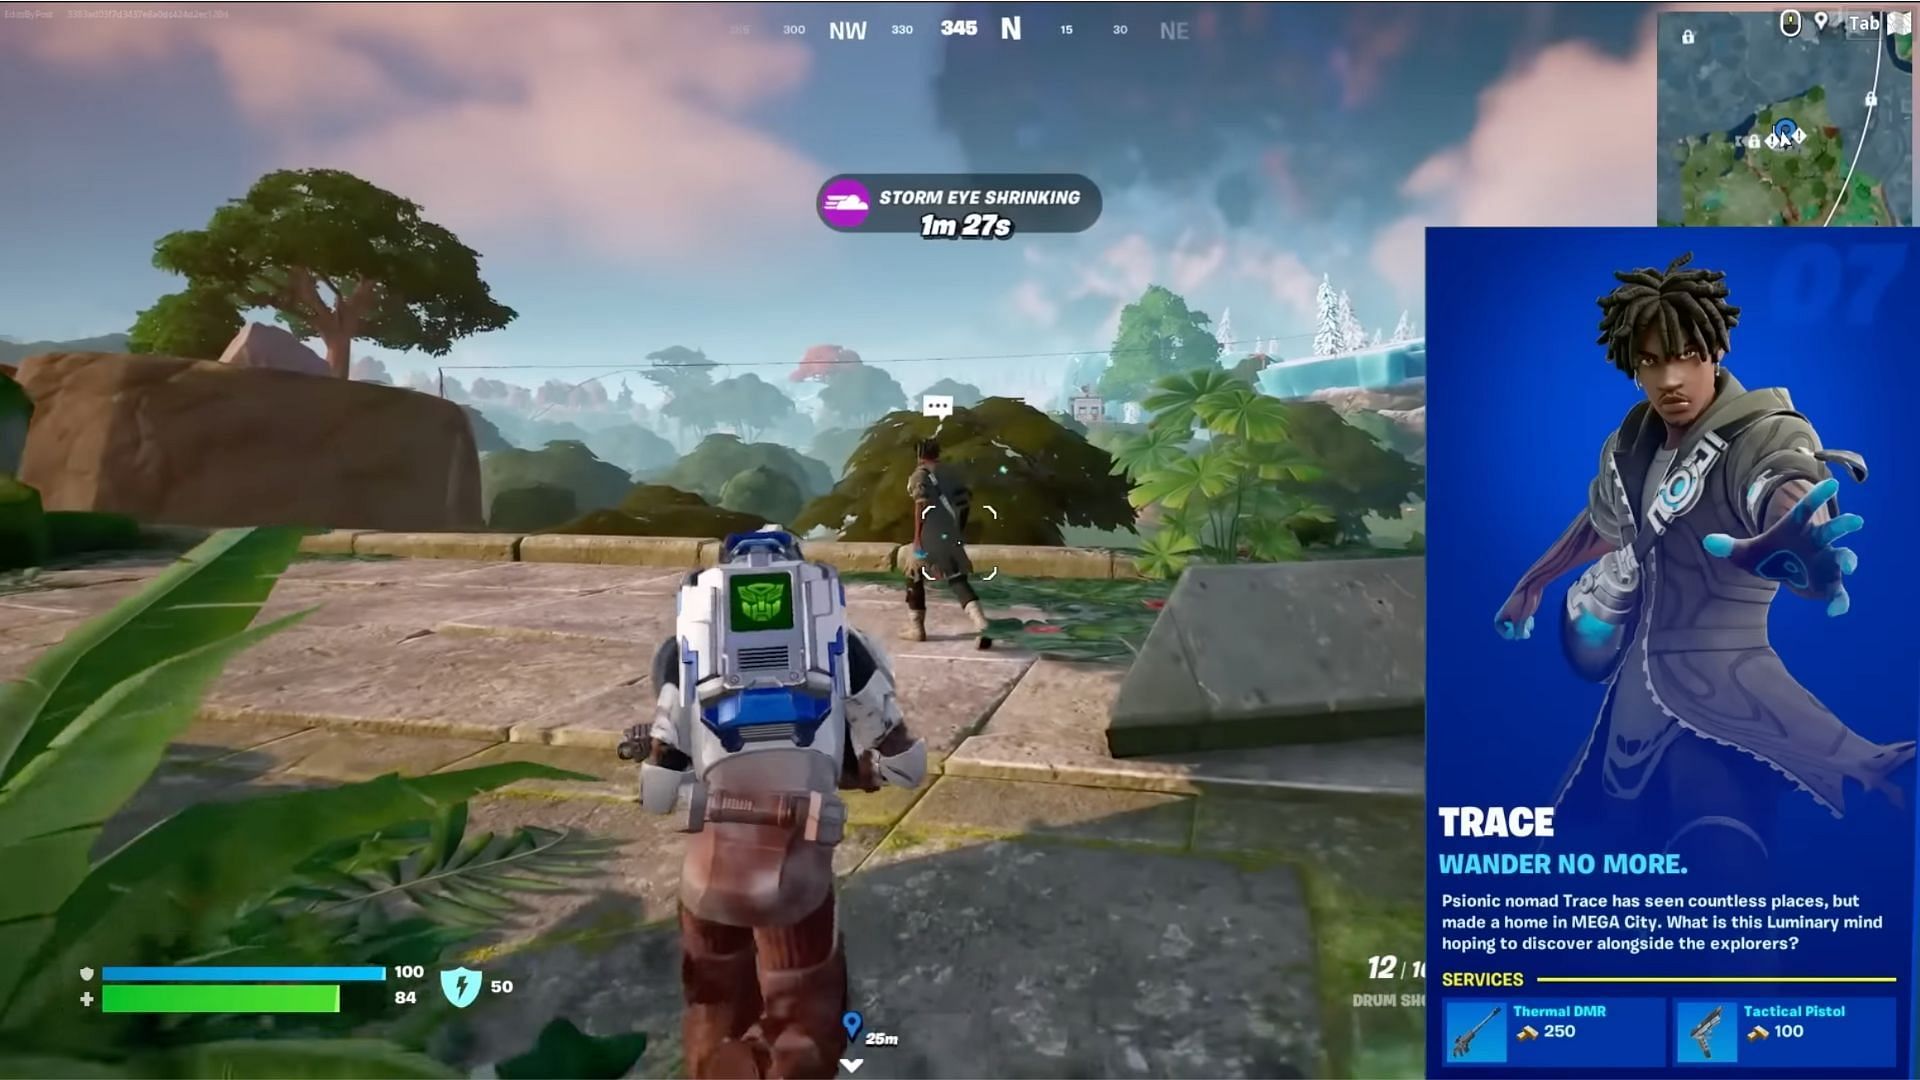 Trace in Fortnite (Image via By Post on YouTube)